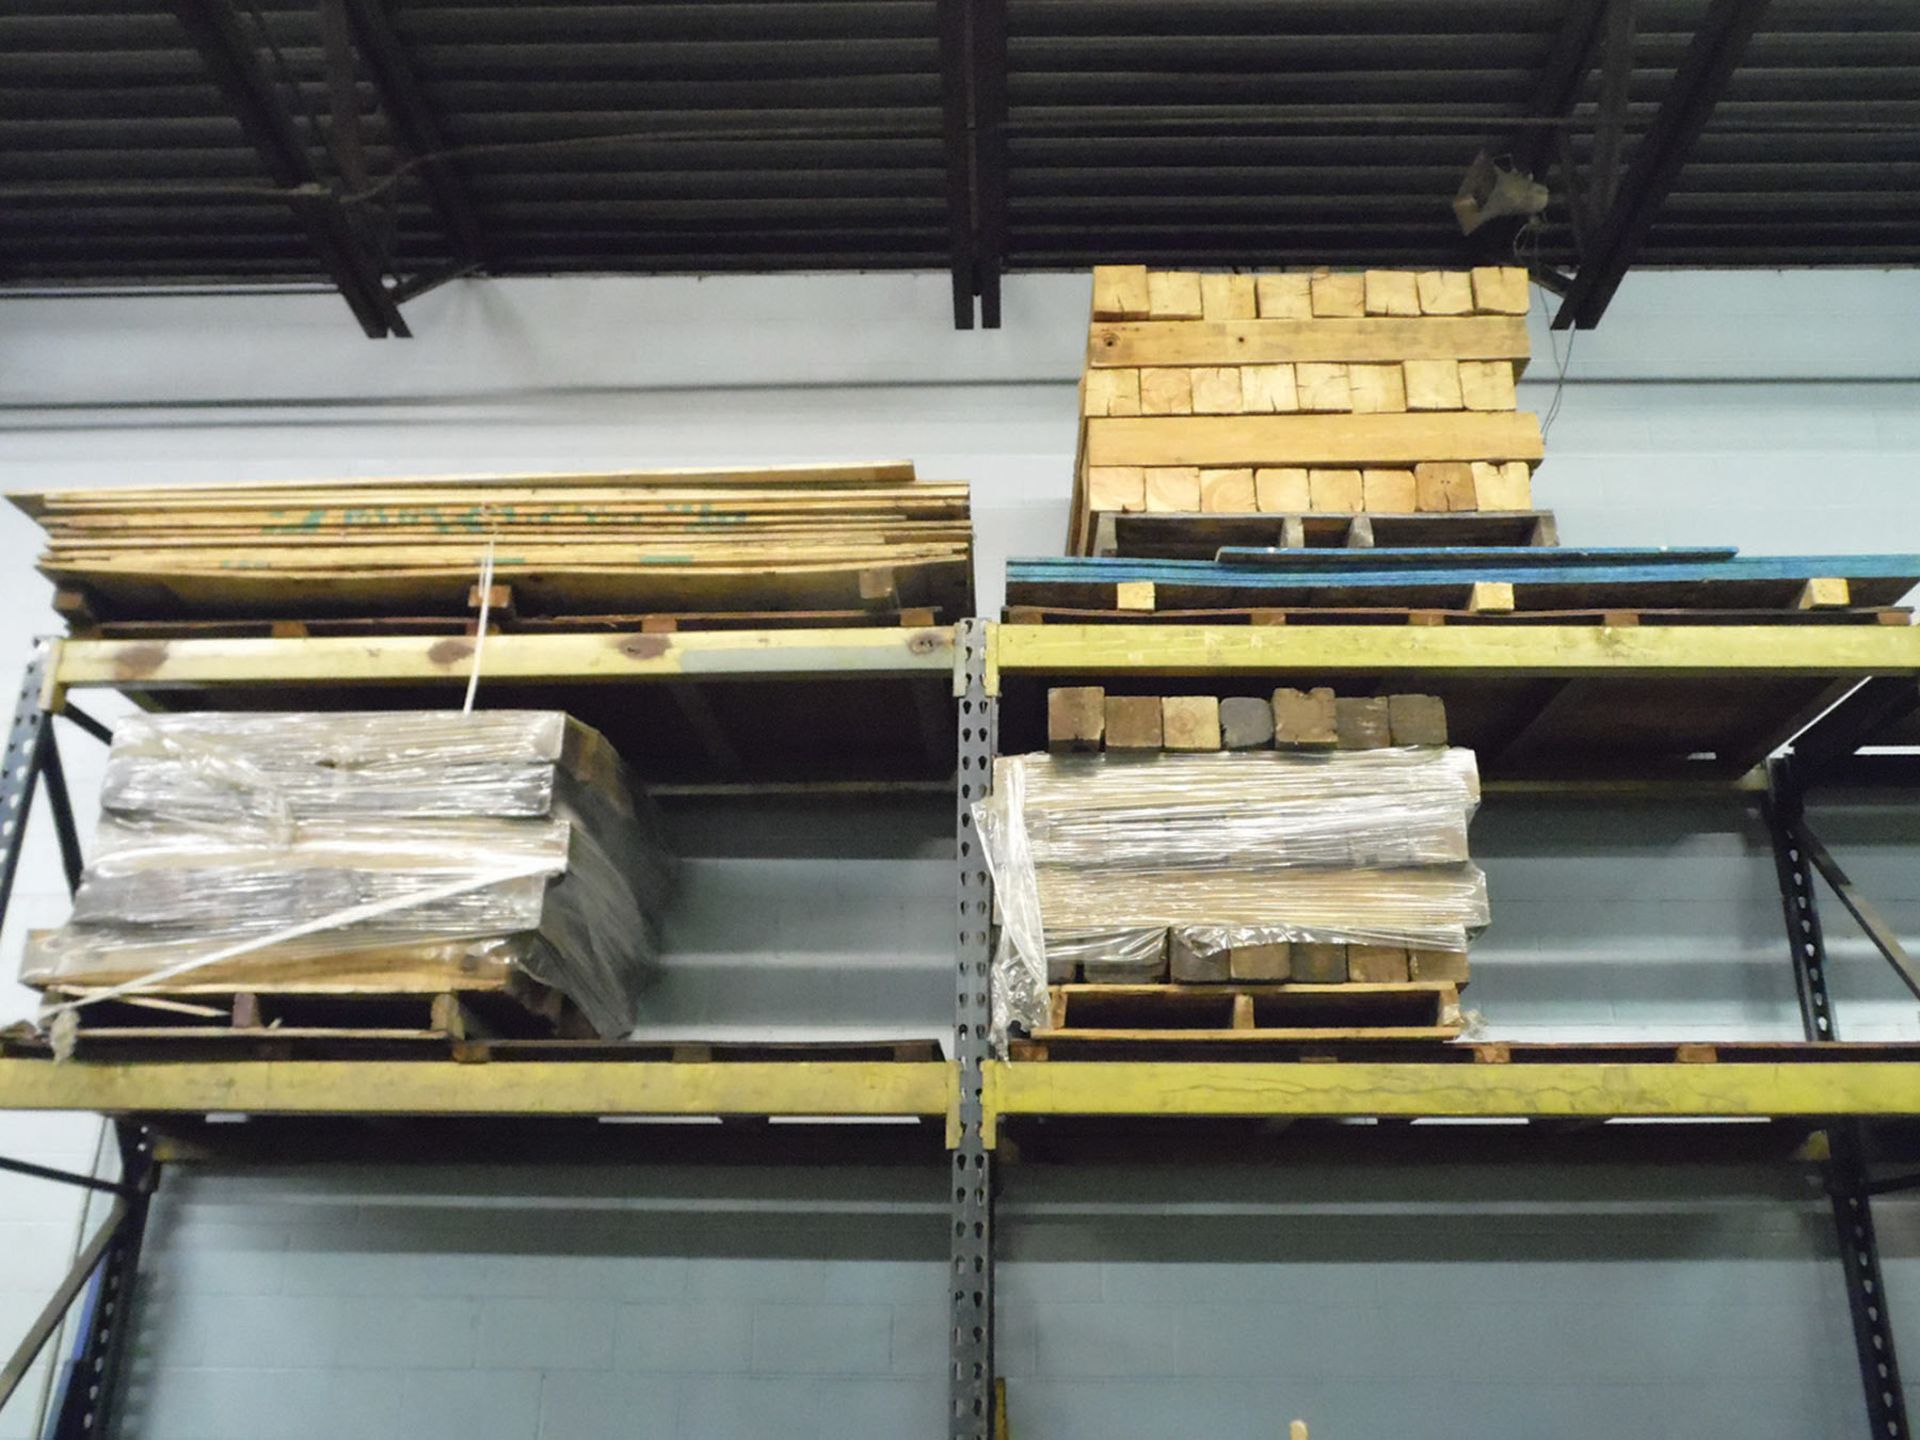 CONTENTS OF TOP SHELVES OF RACKING, 6'' X 6'' AND 4'' X 4'' BLOCKING & PLYWOOD